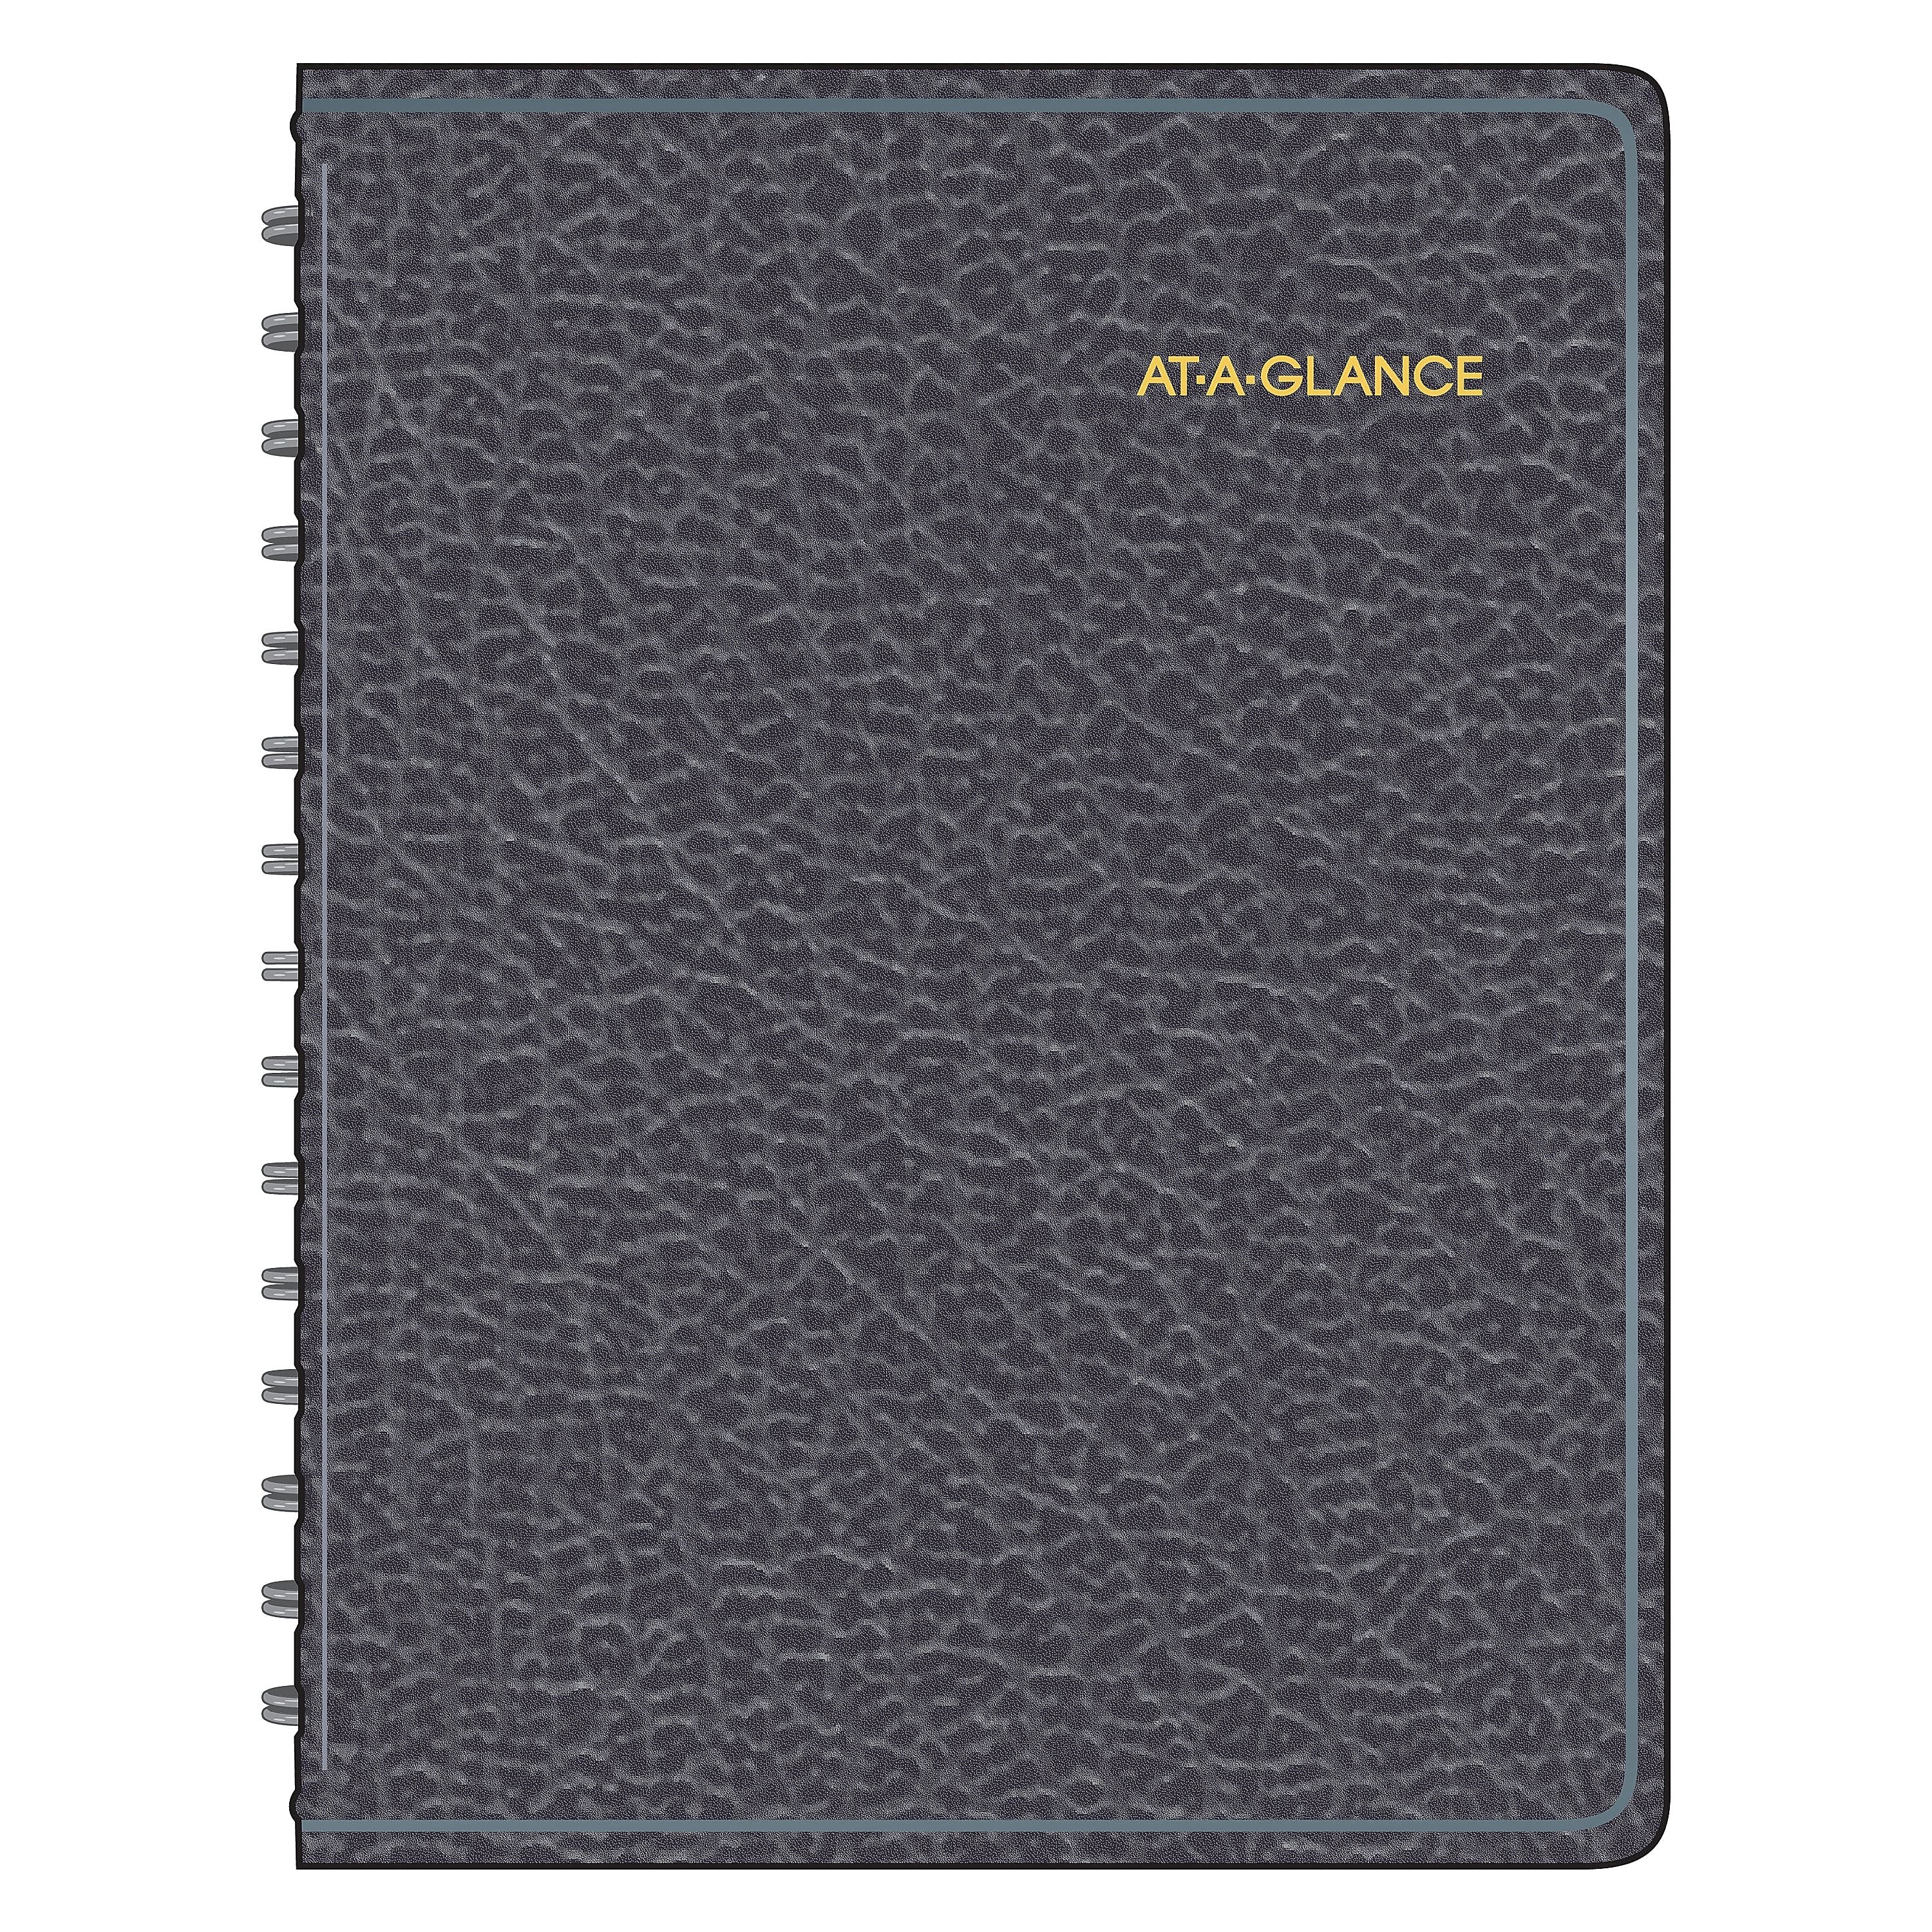 AT-A-GLANCE Four-Person Group 8.5" x 10.875" Daily Appointment Book, Black